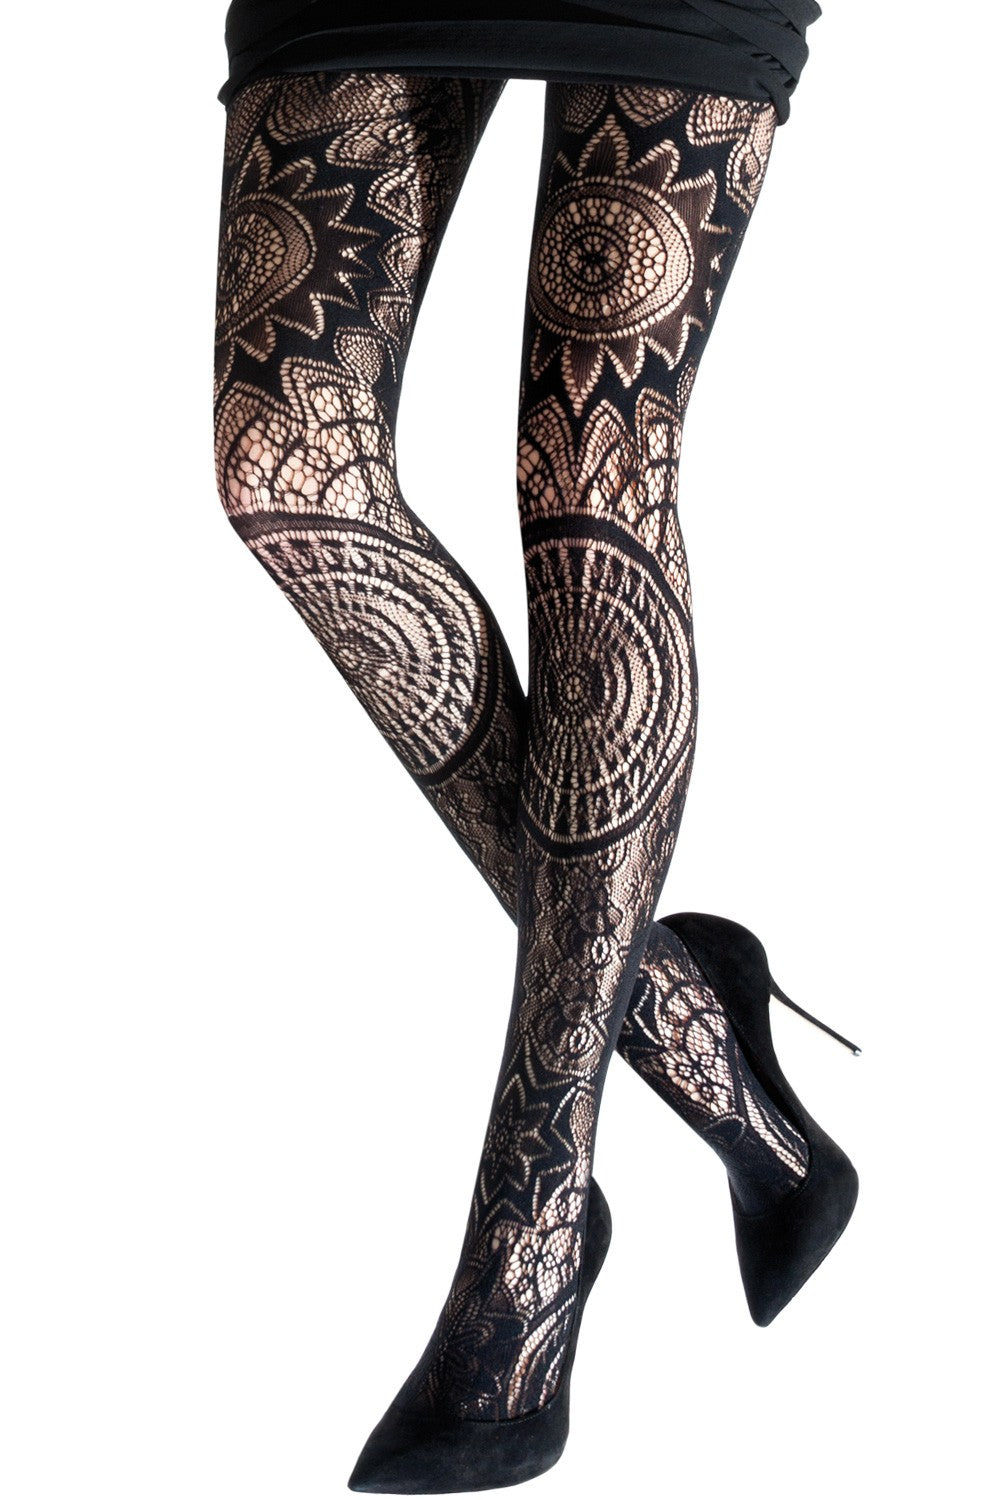 Emilio Cavallini Gothic Lace Tights - openwork lace tights in a gothic mandala style